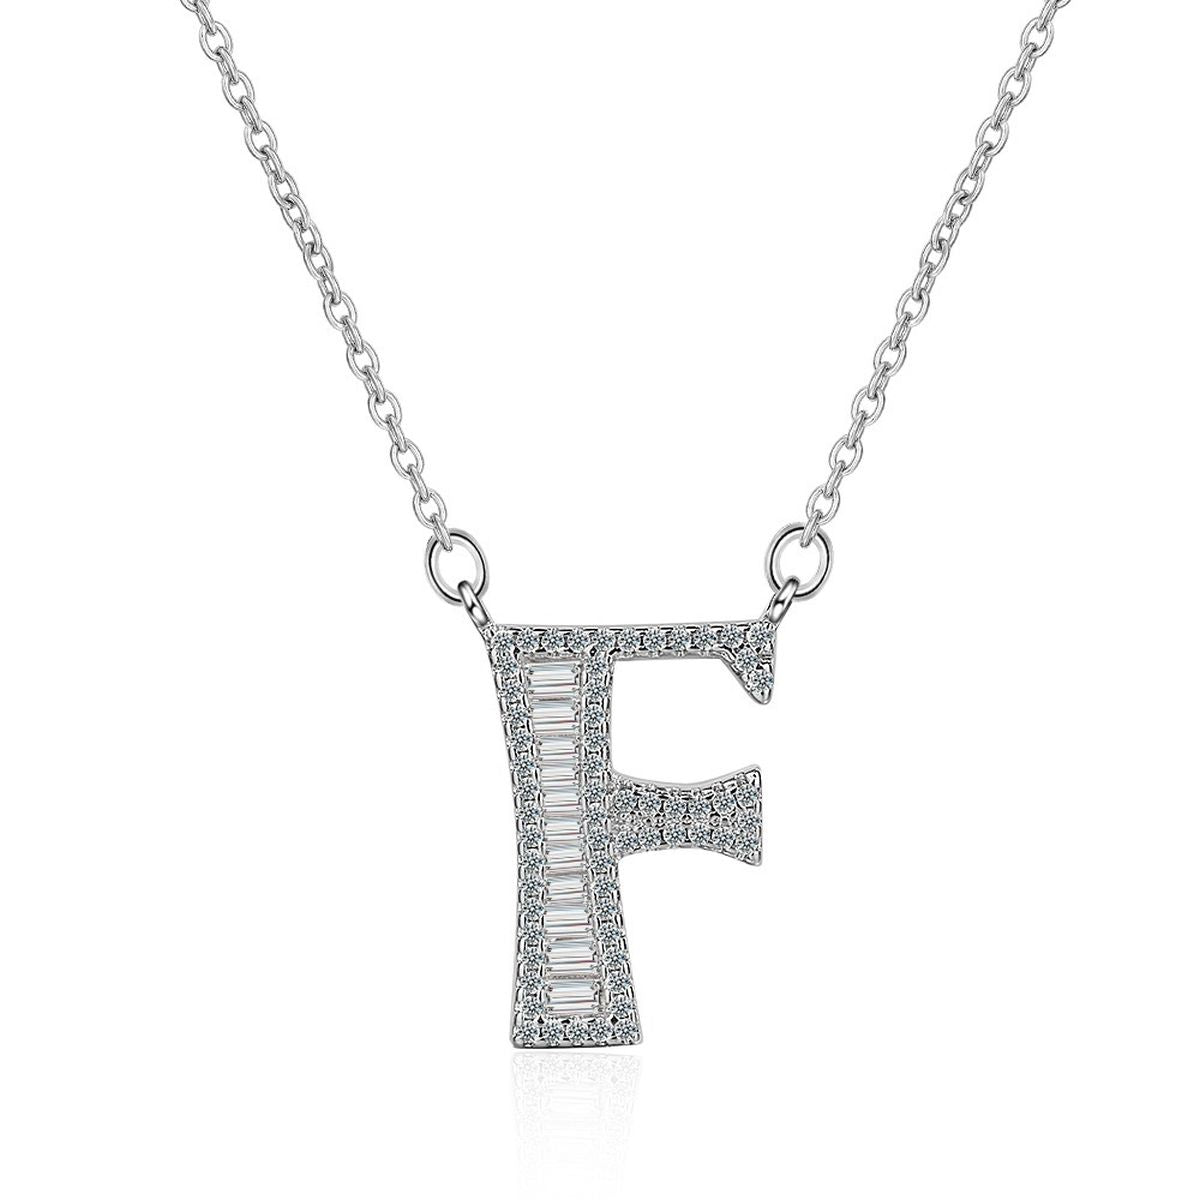 Preorder on 9820829656-diamond studded initial necklace